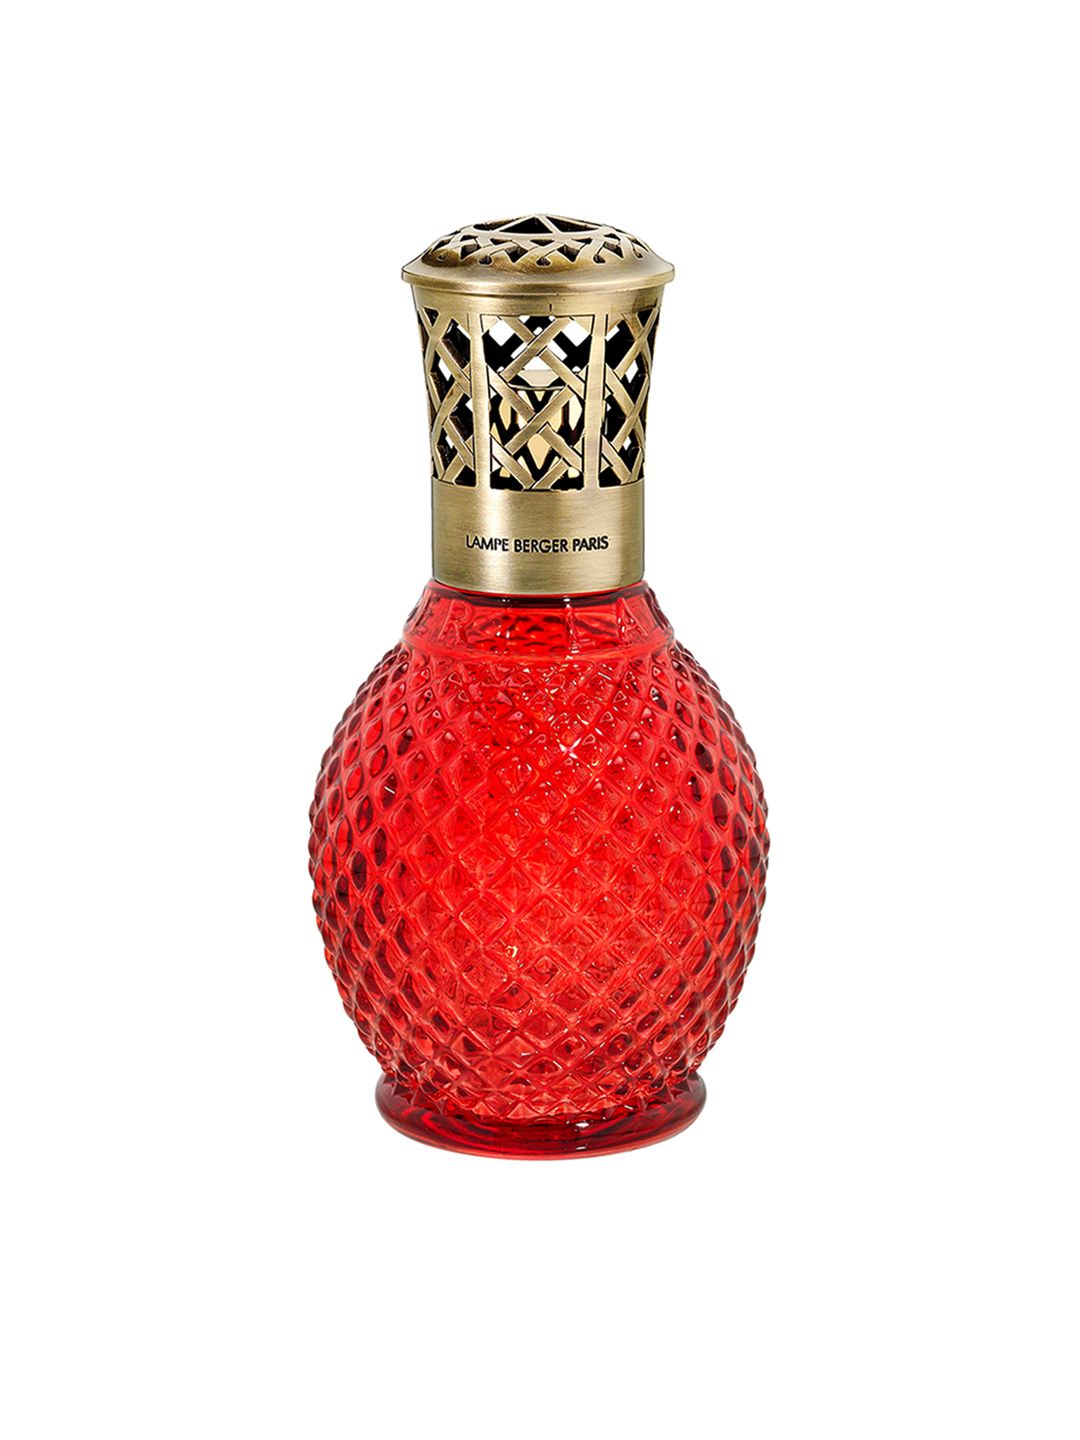 MAISON BERGER Red & Gold-Toned Textured Glass Rouge Aroma Oil Diffuser Price in India